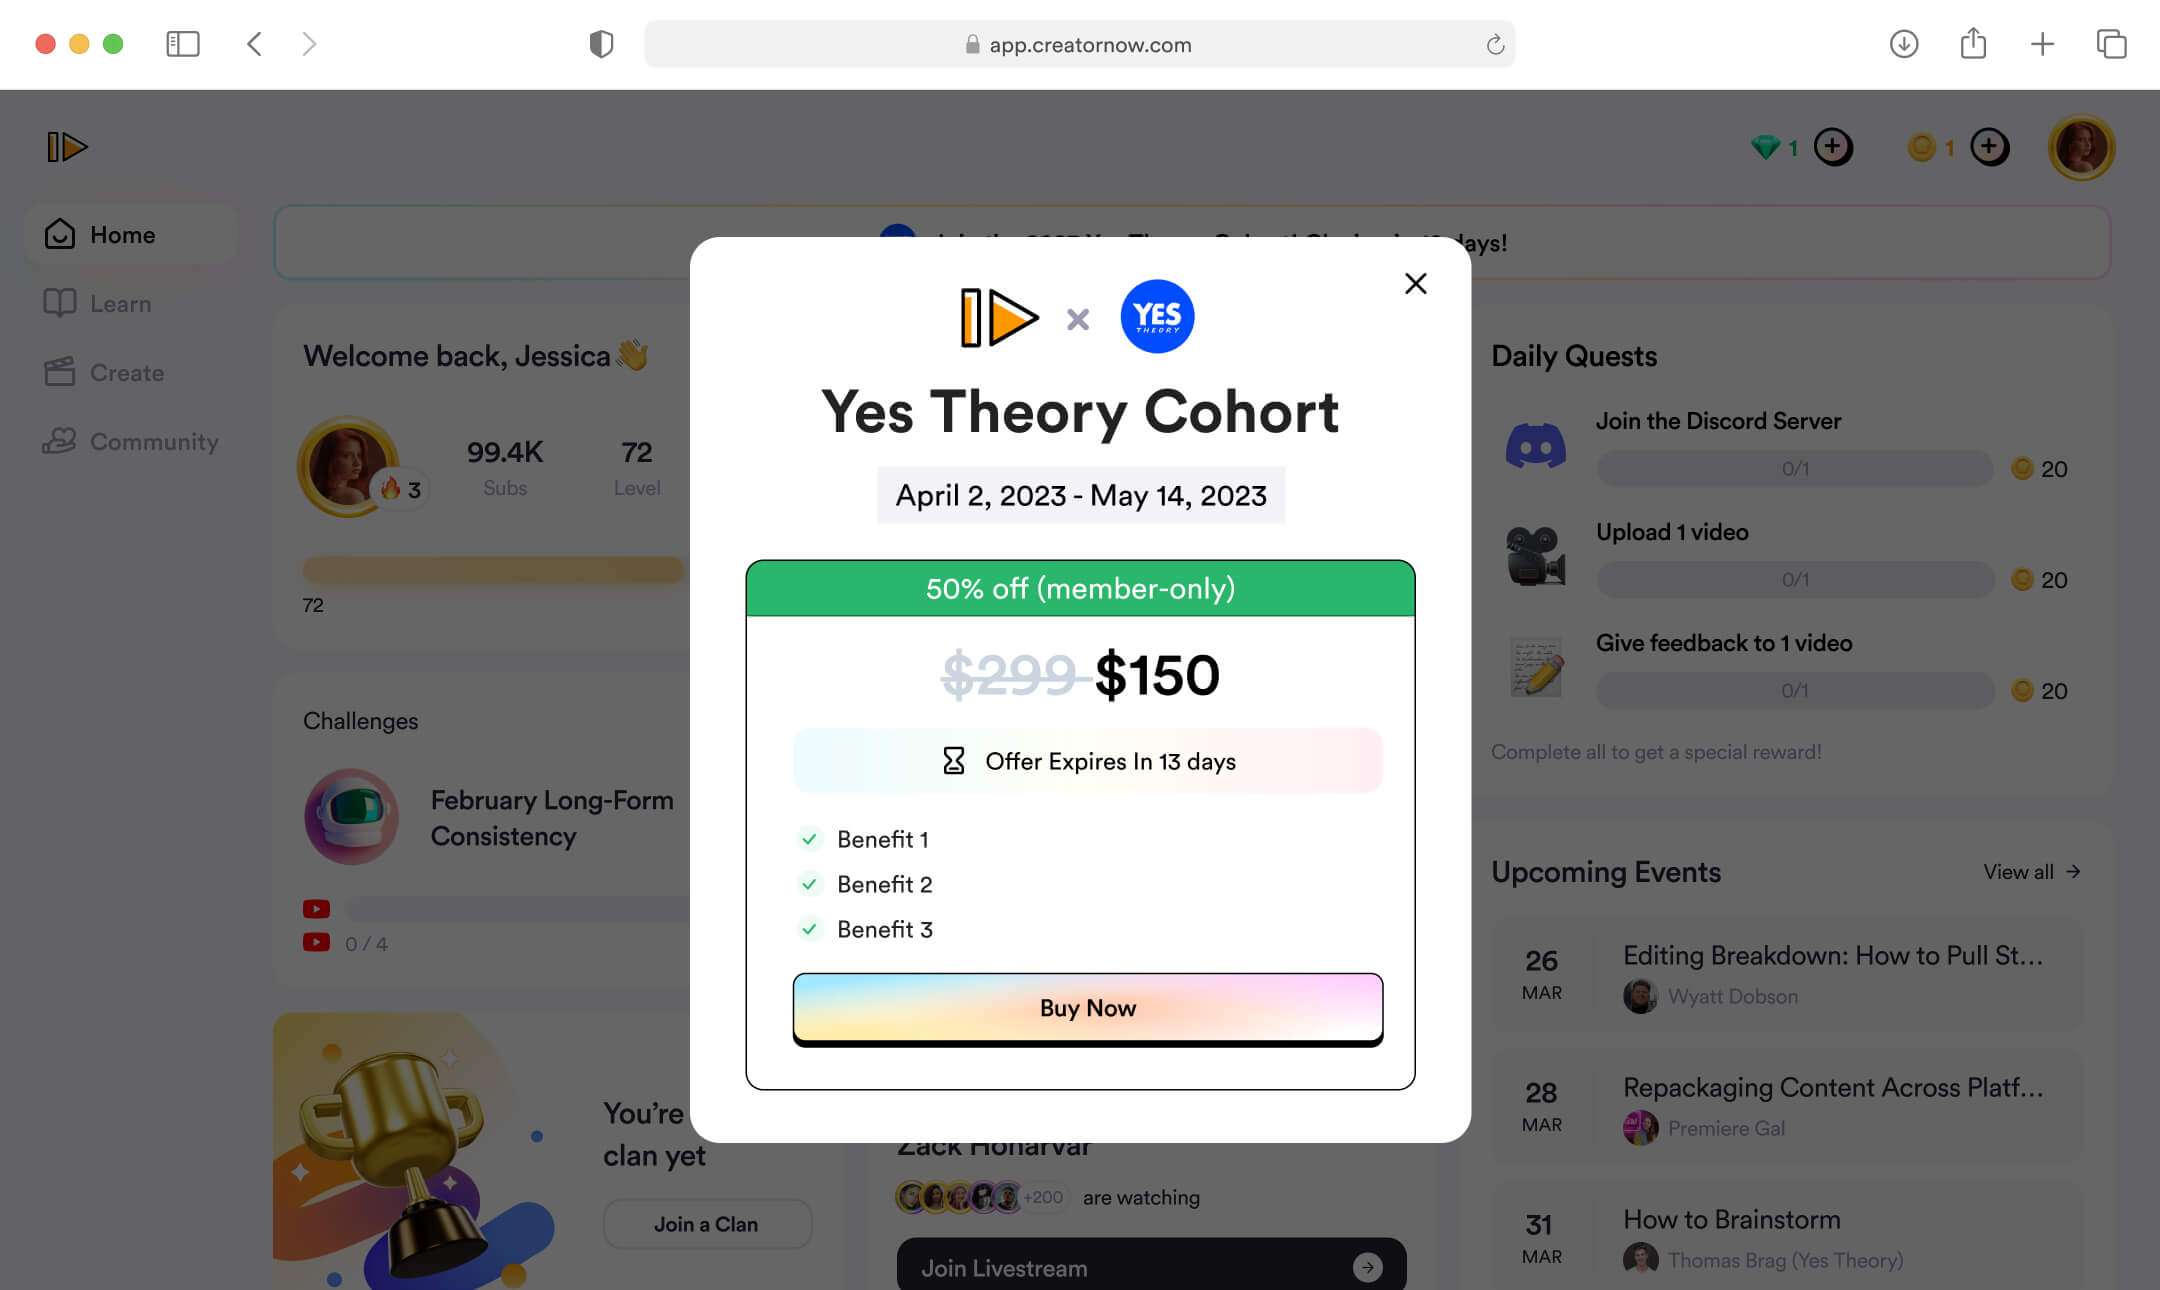 In app popup promoting the Yes Theory cohort